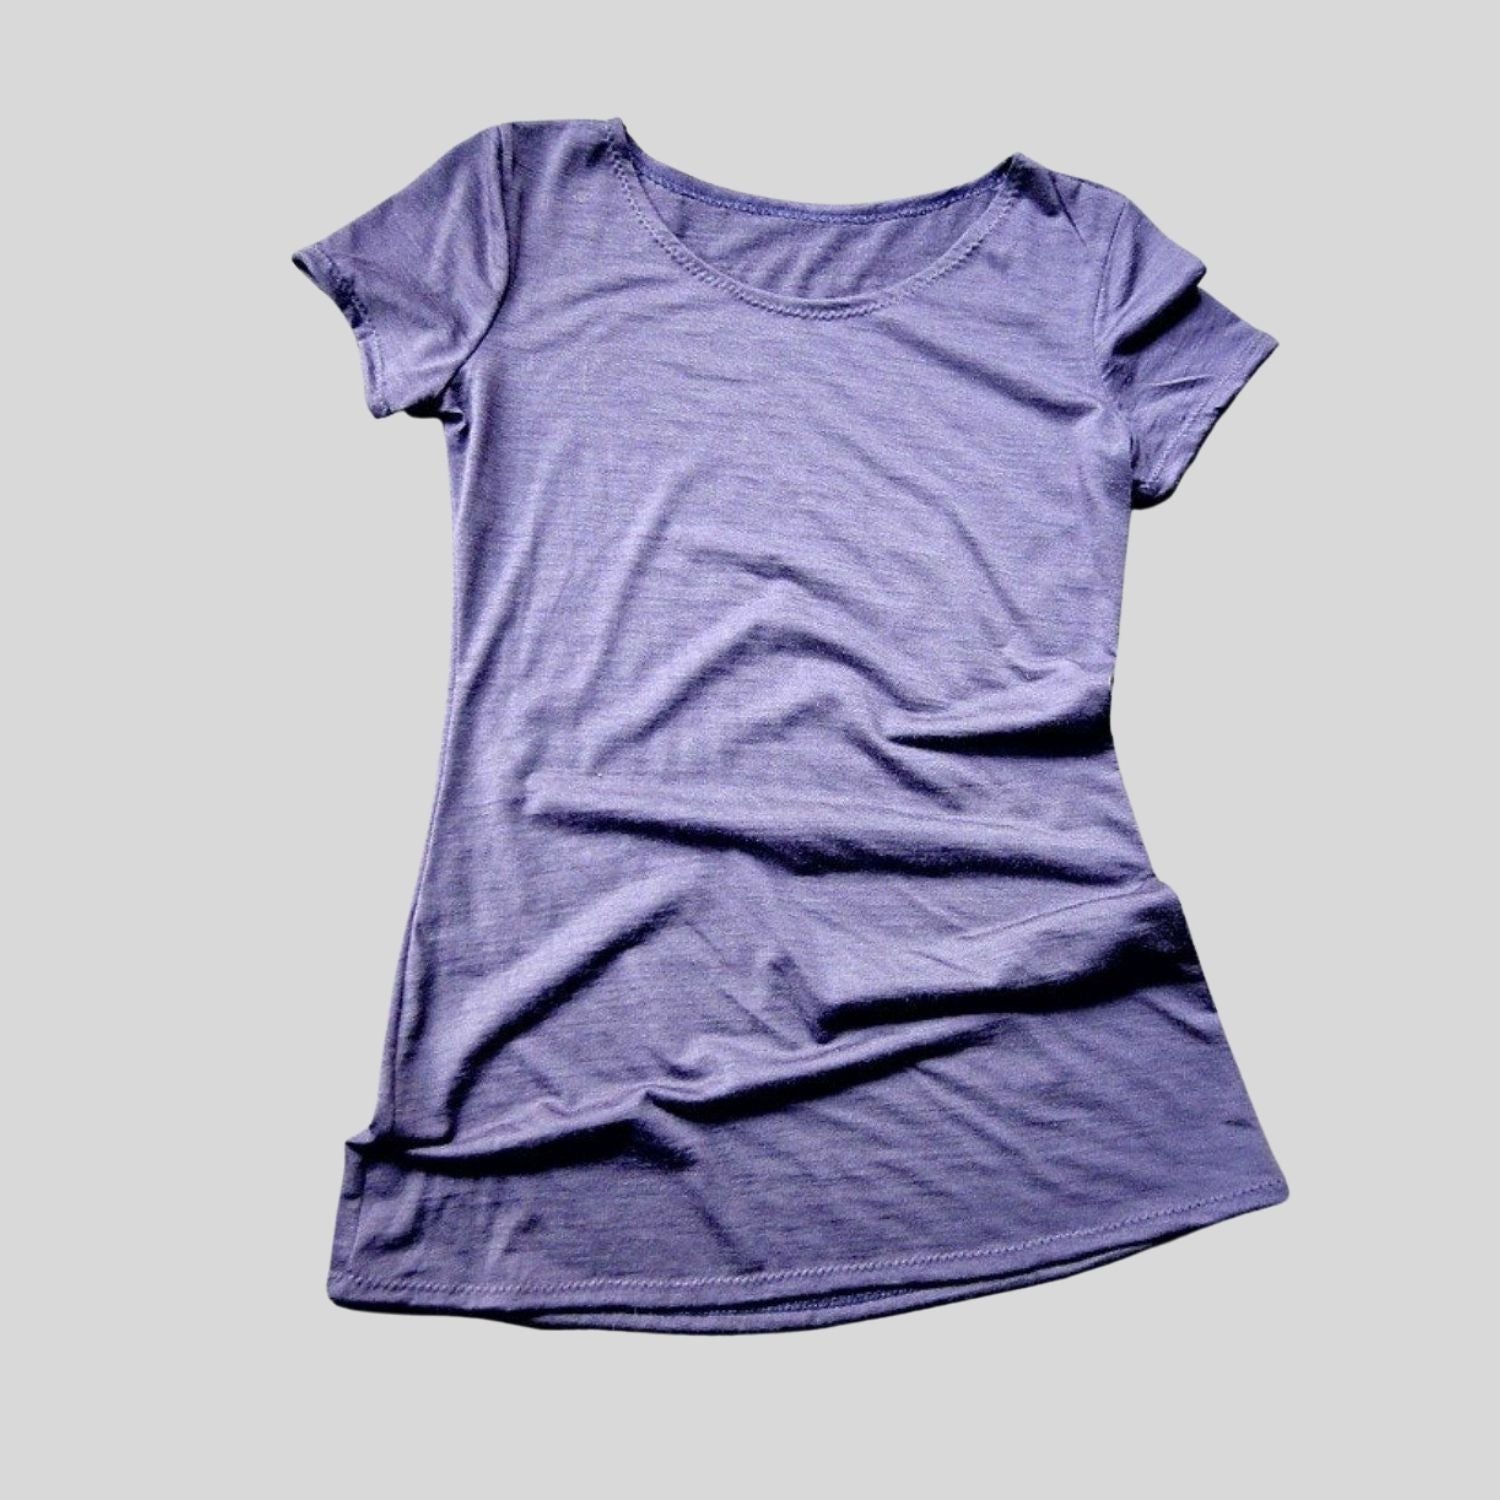 Fitted wool or cotton tee shirt for women